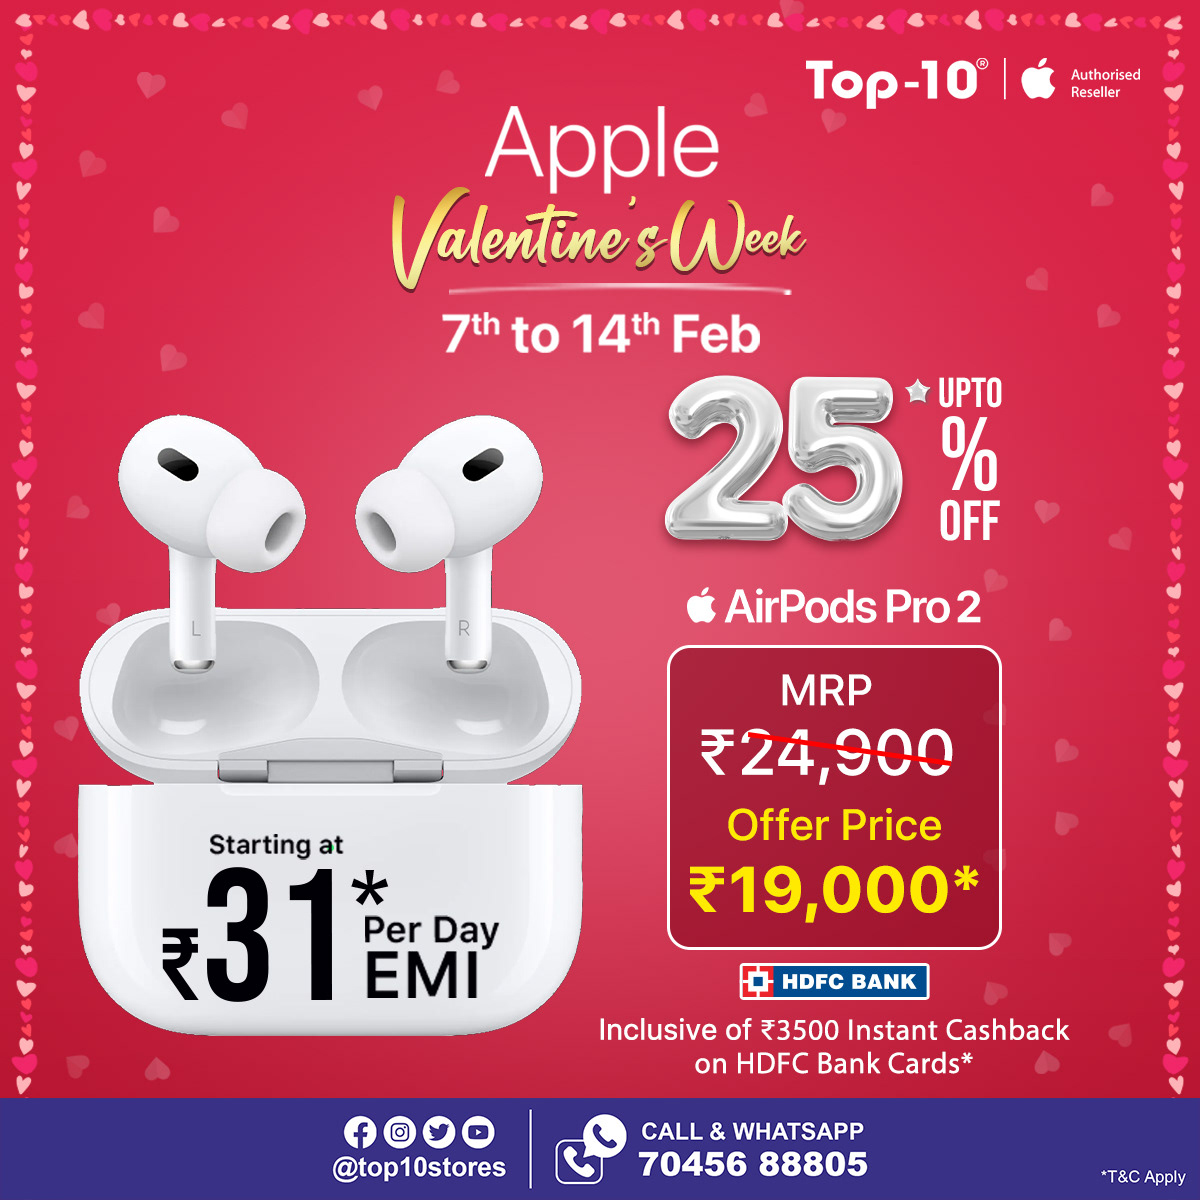 apple applewatch airpods iphone ios Social media post marketing   campaign design